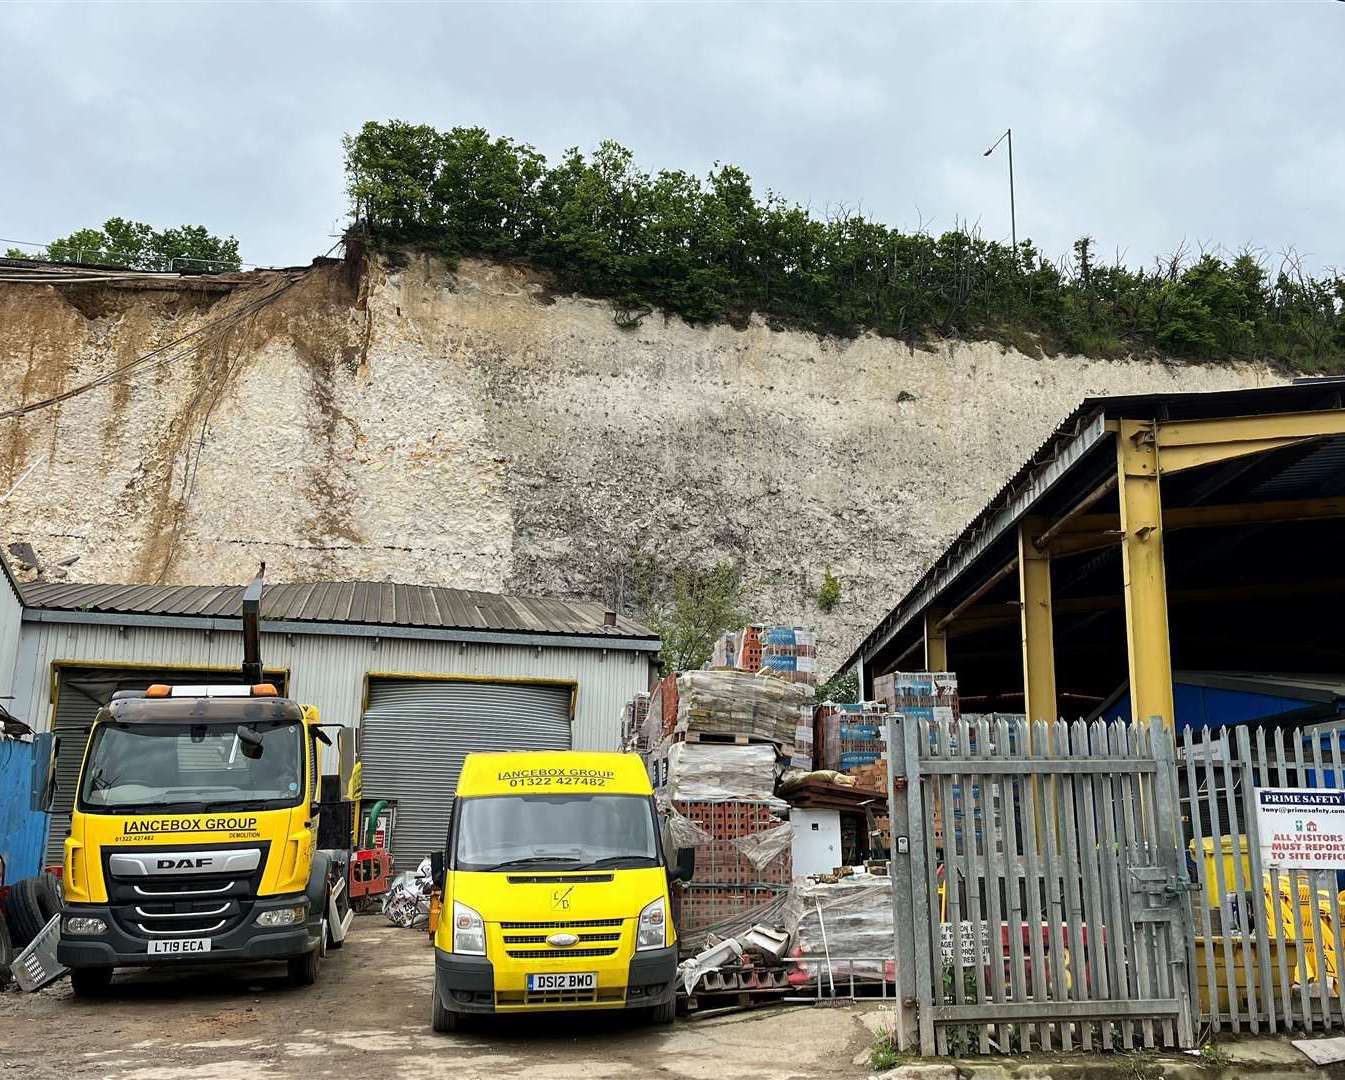 Lancebox Ltd in Manor Way Business Park, Swanscombe are seeking compensation after the road crumbled onto their building causing huge damage